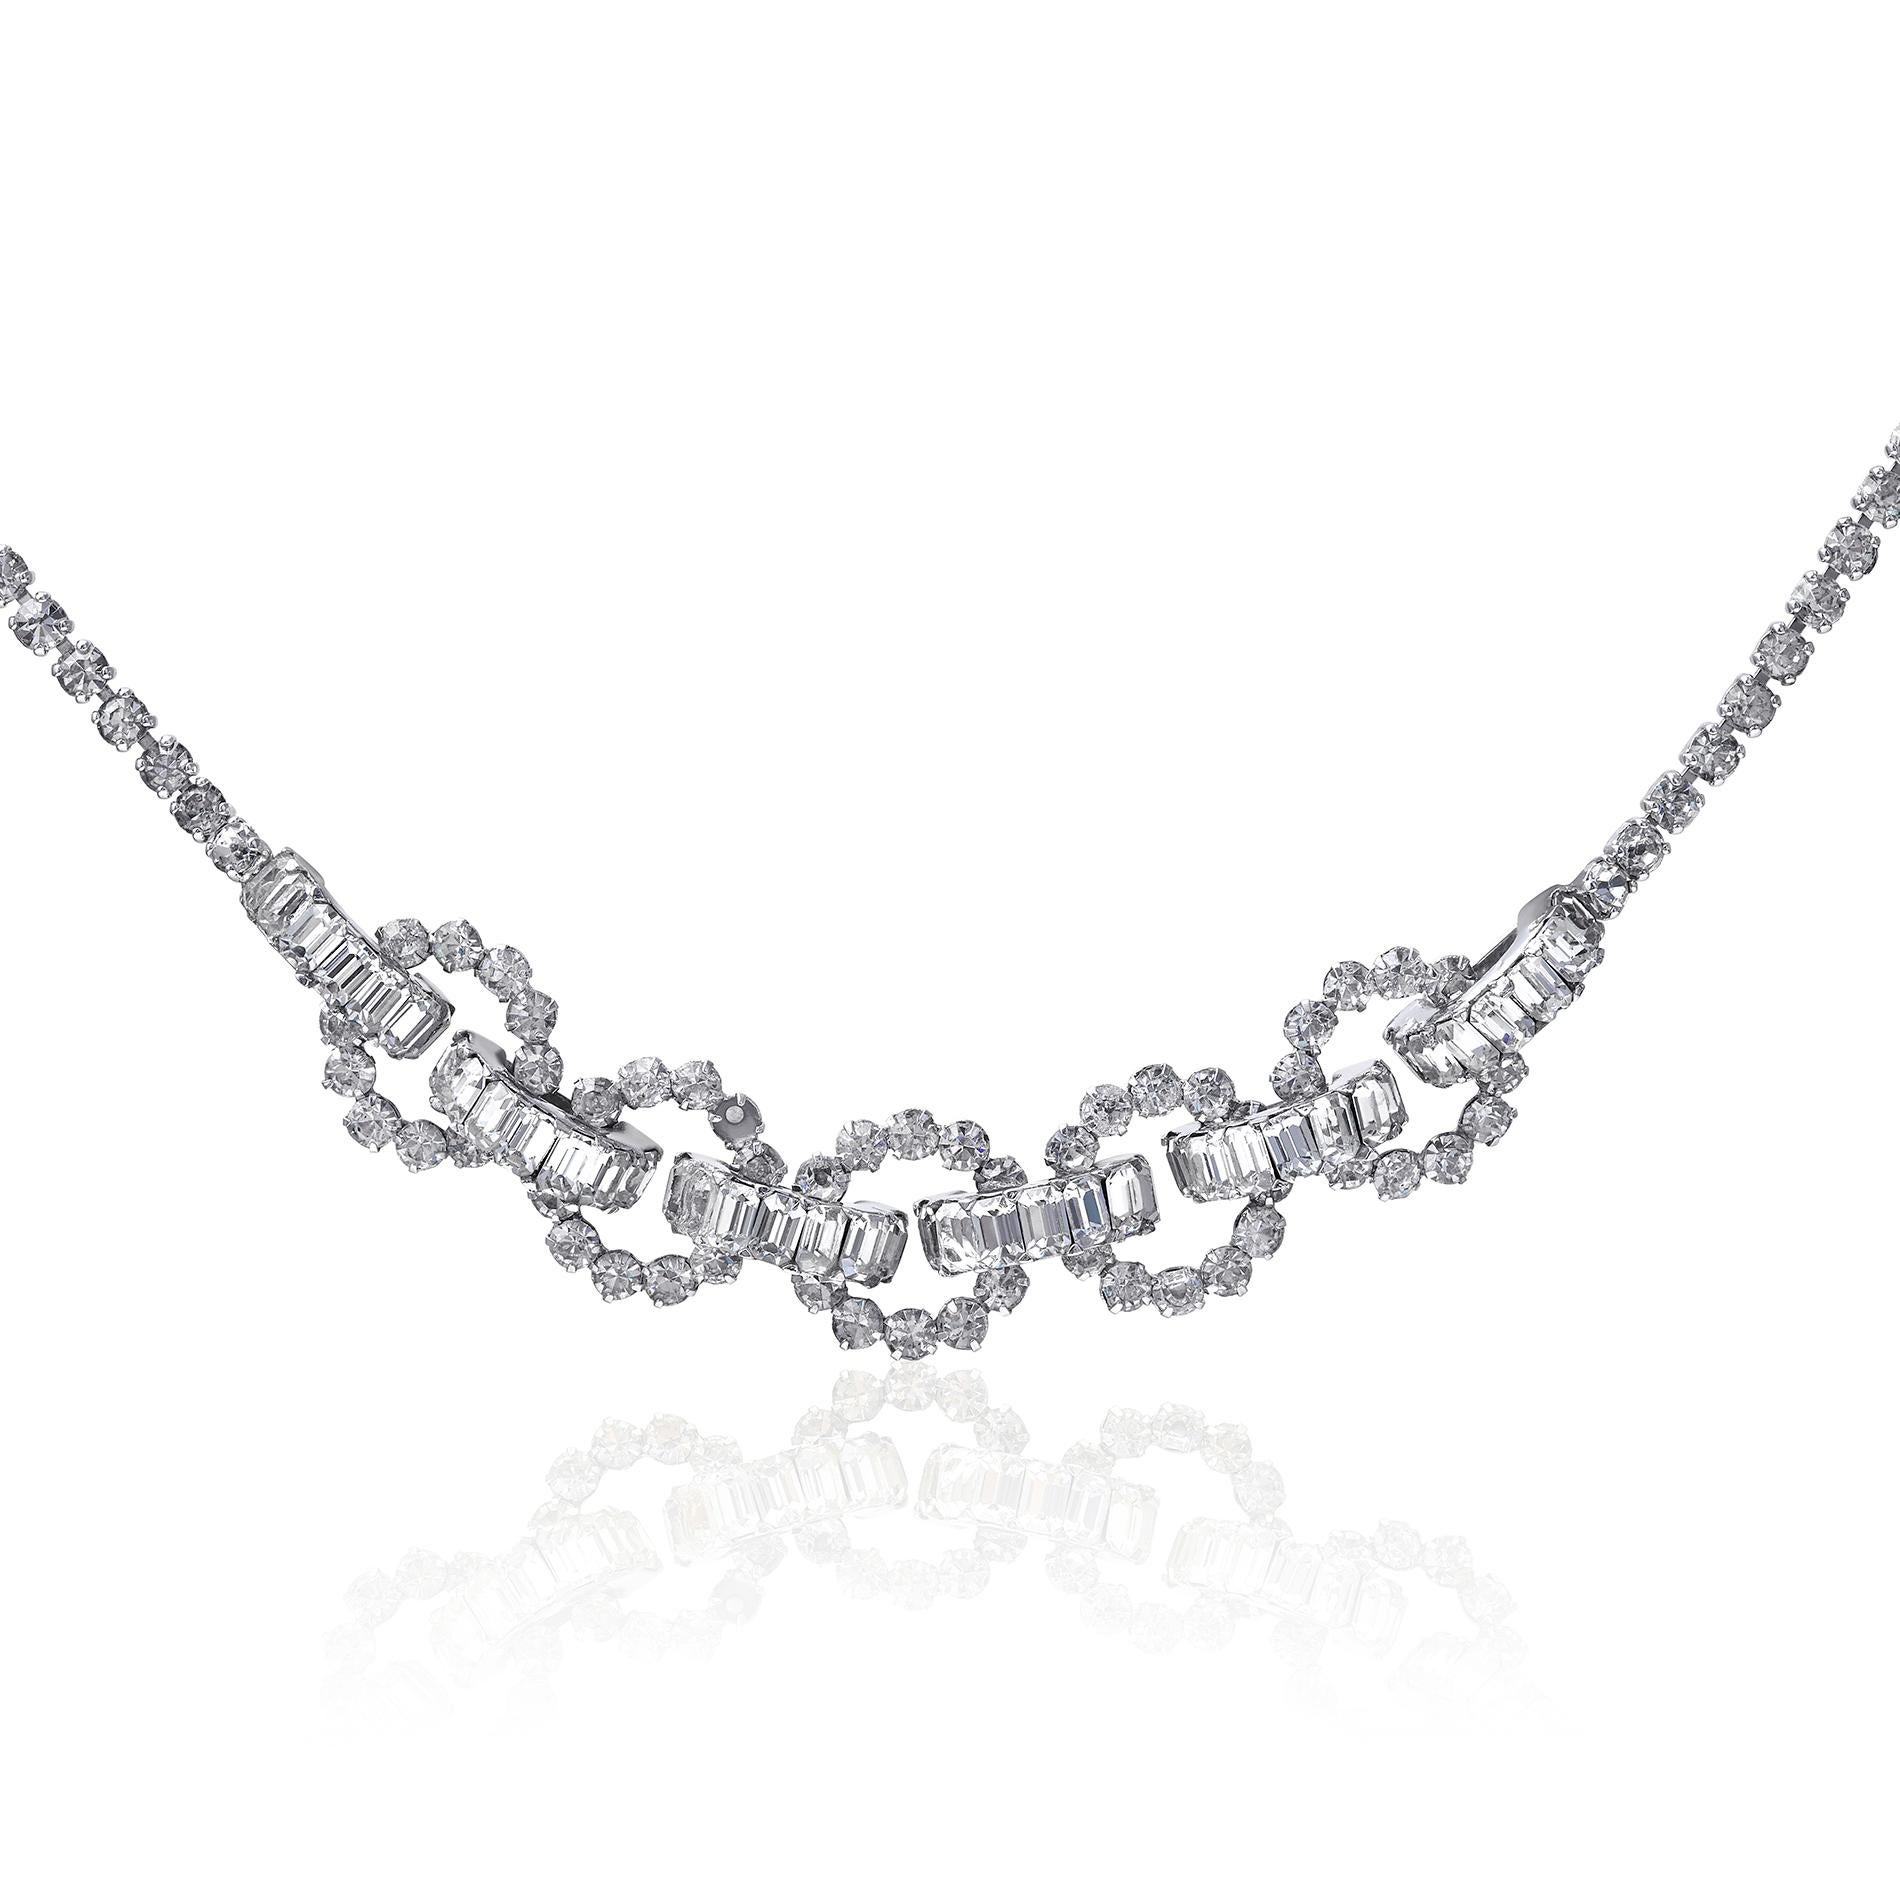 This elegant Christian Dior by Mitchel Maer geometric crystal necklace is rhodium plated, in excellent vintage condition and the gemstones have exceptional clarity. The central circular composition consists of five circles of small facetted prong